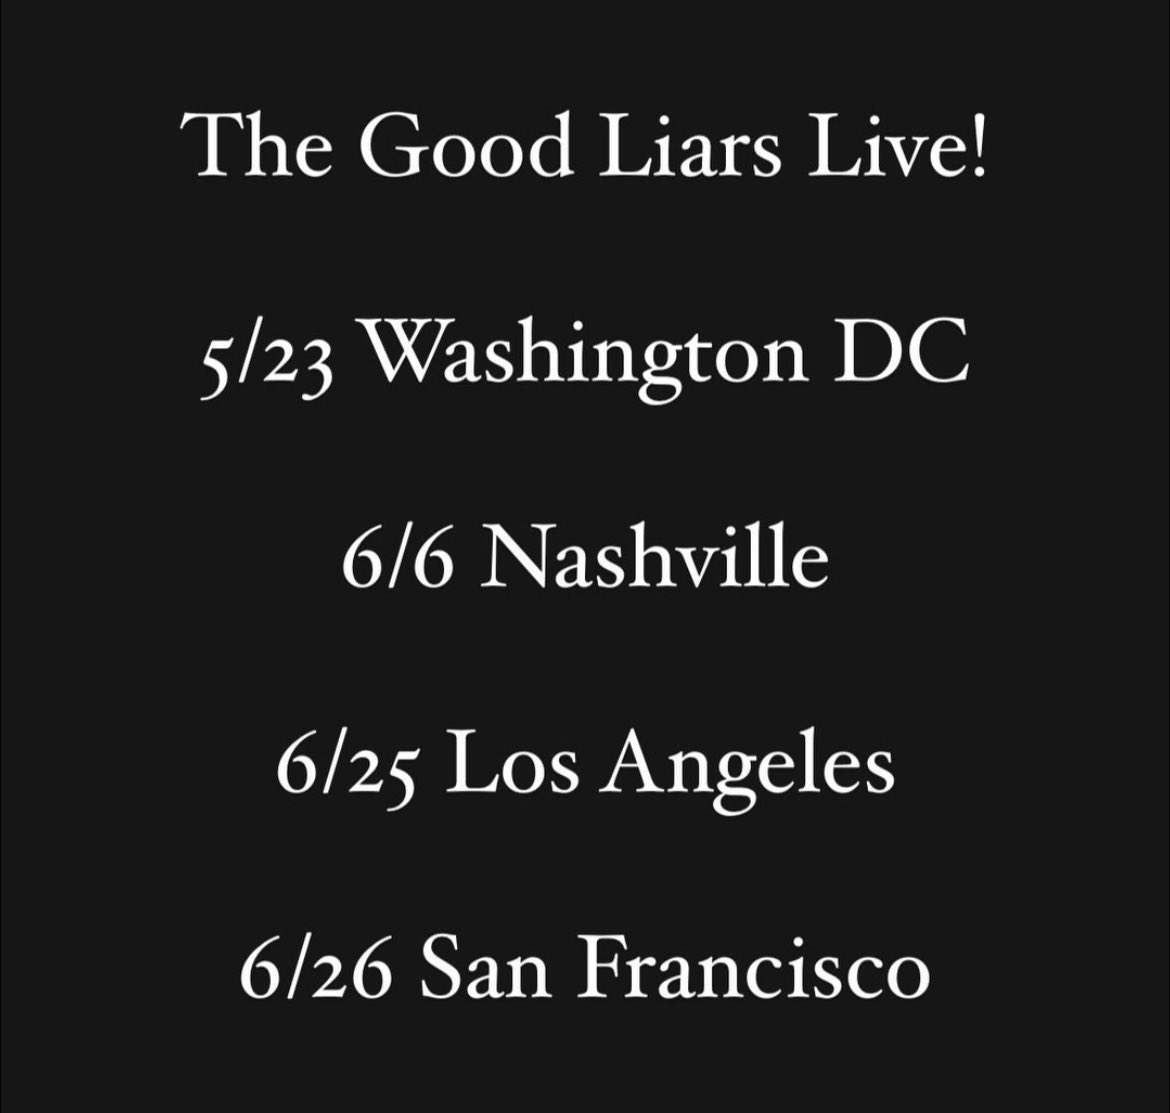 Come see our live shows! Tickets here: goodliars.com/live-shows 🎟️